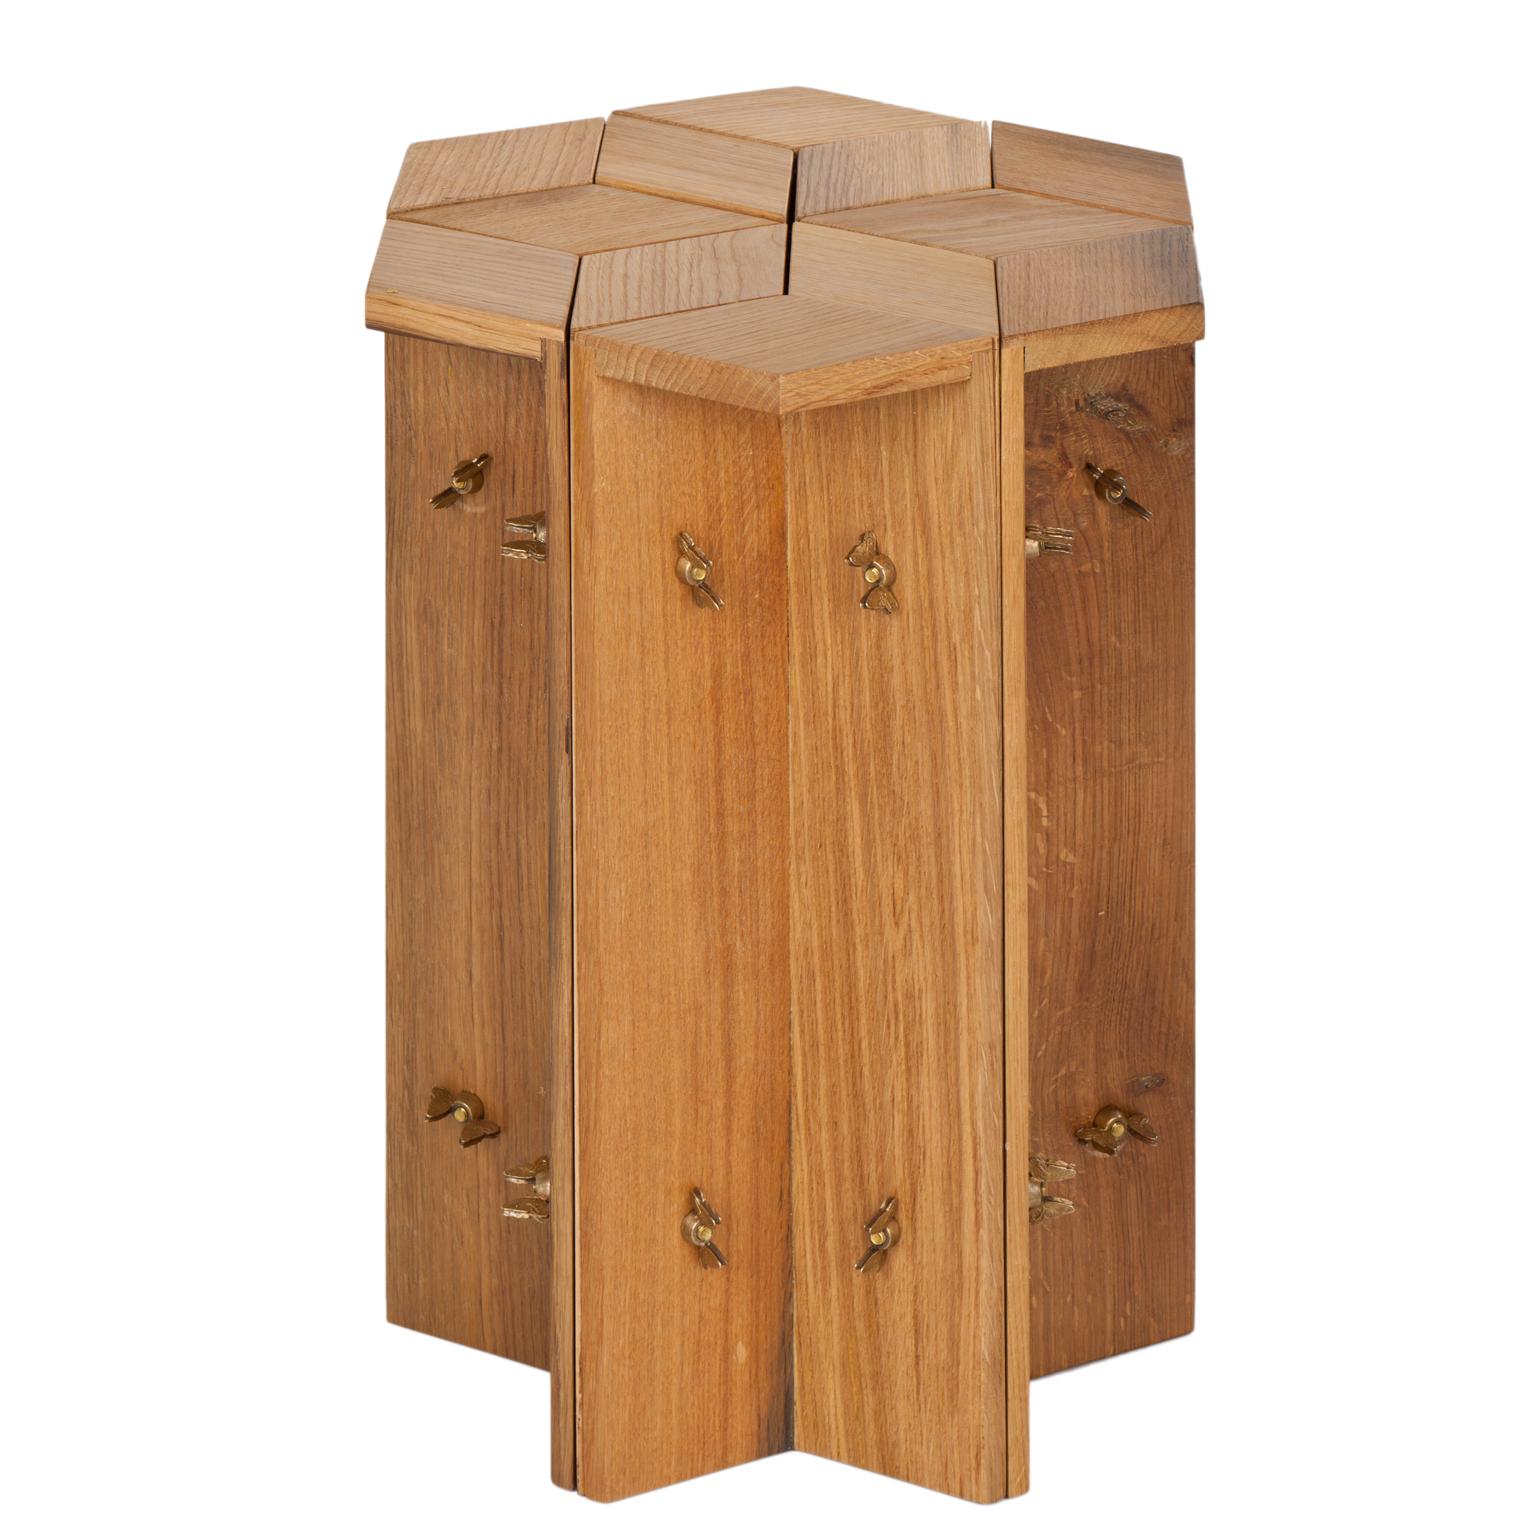 Mike Reclaimed Oak Stool by Fred and Juul
Dimensions: D 31 x W 36 x H 45 cm.
Materials: Reclaimed oak and brass.

This stool can also be used as a side table. Custom sizes, materials or finishes are available. Please contact us.

Mike was born out